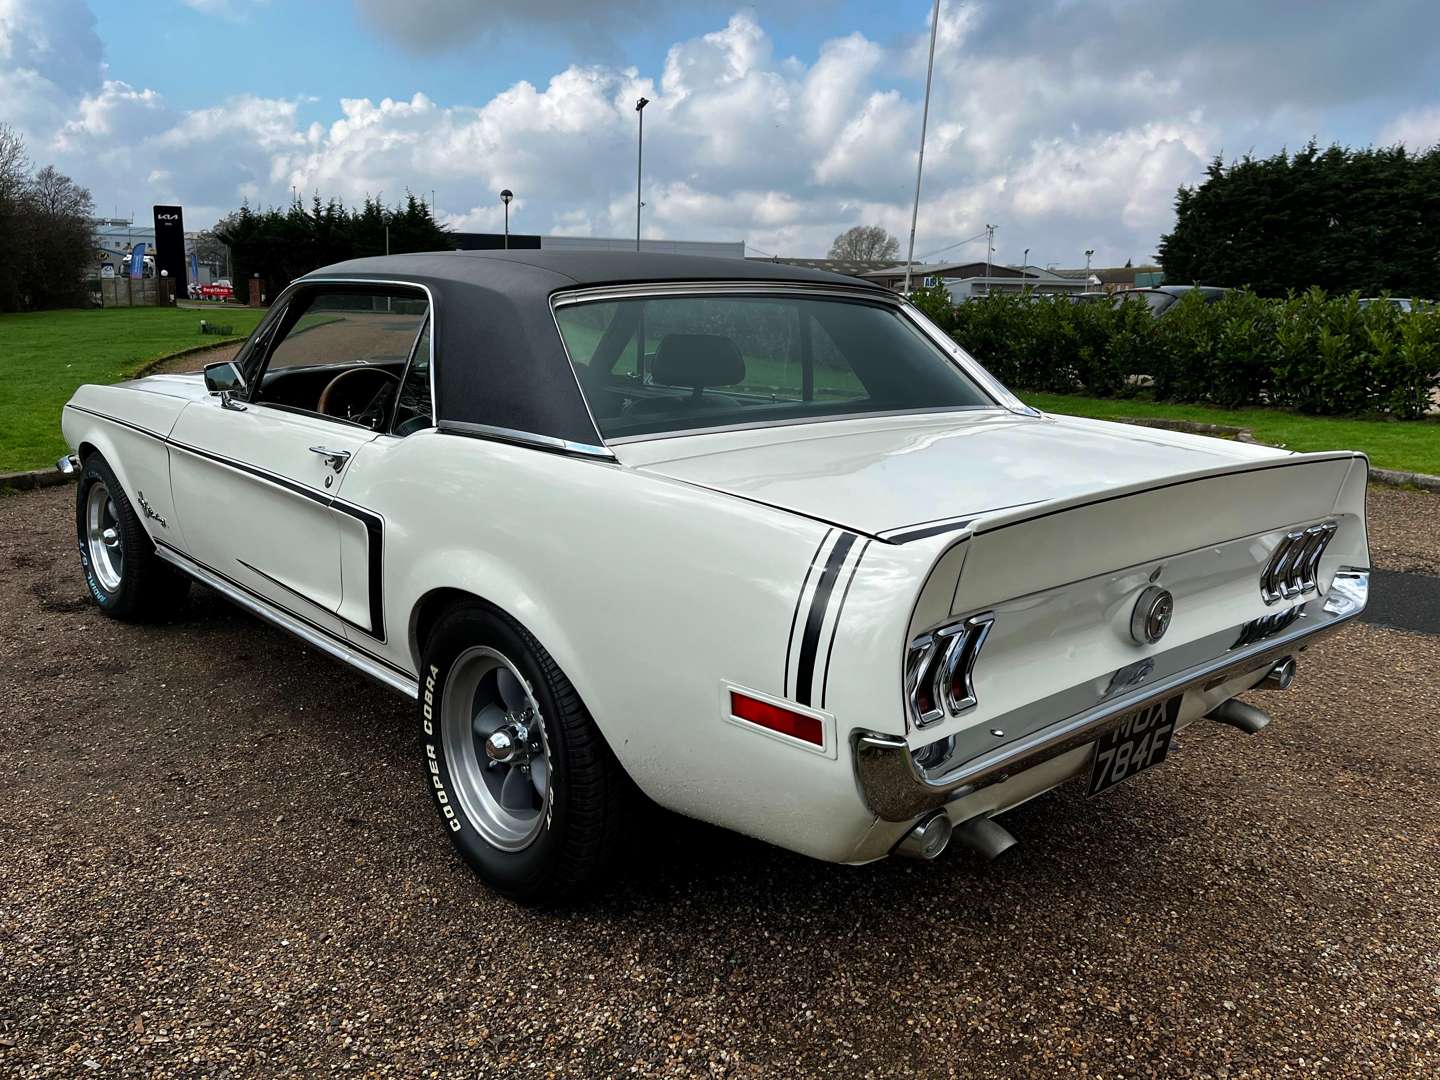 1968 FORD MUSTANG 5.0 V8 AUTO COUPE LHD - Image 5 of 29